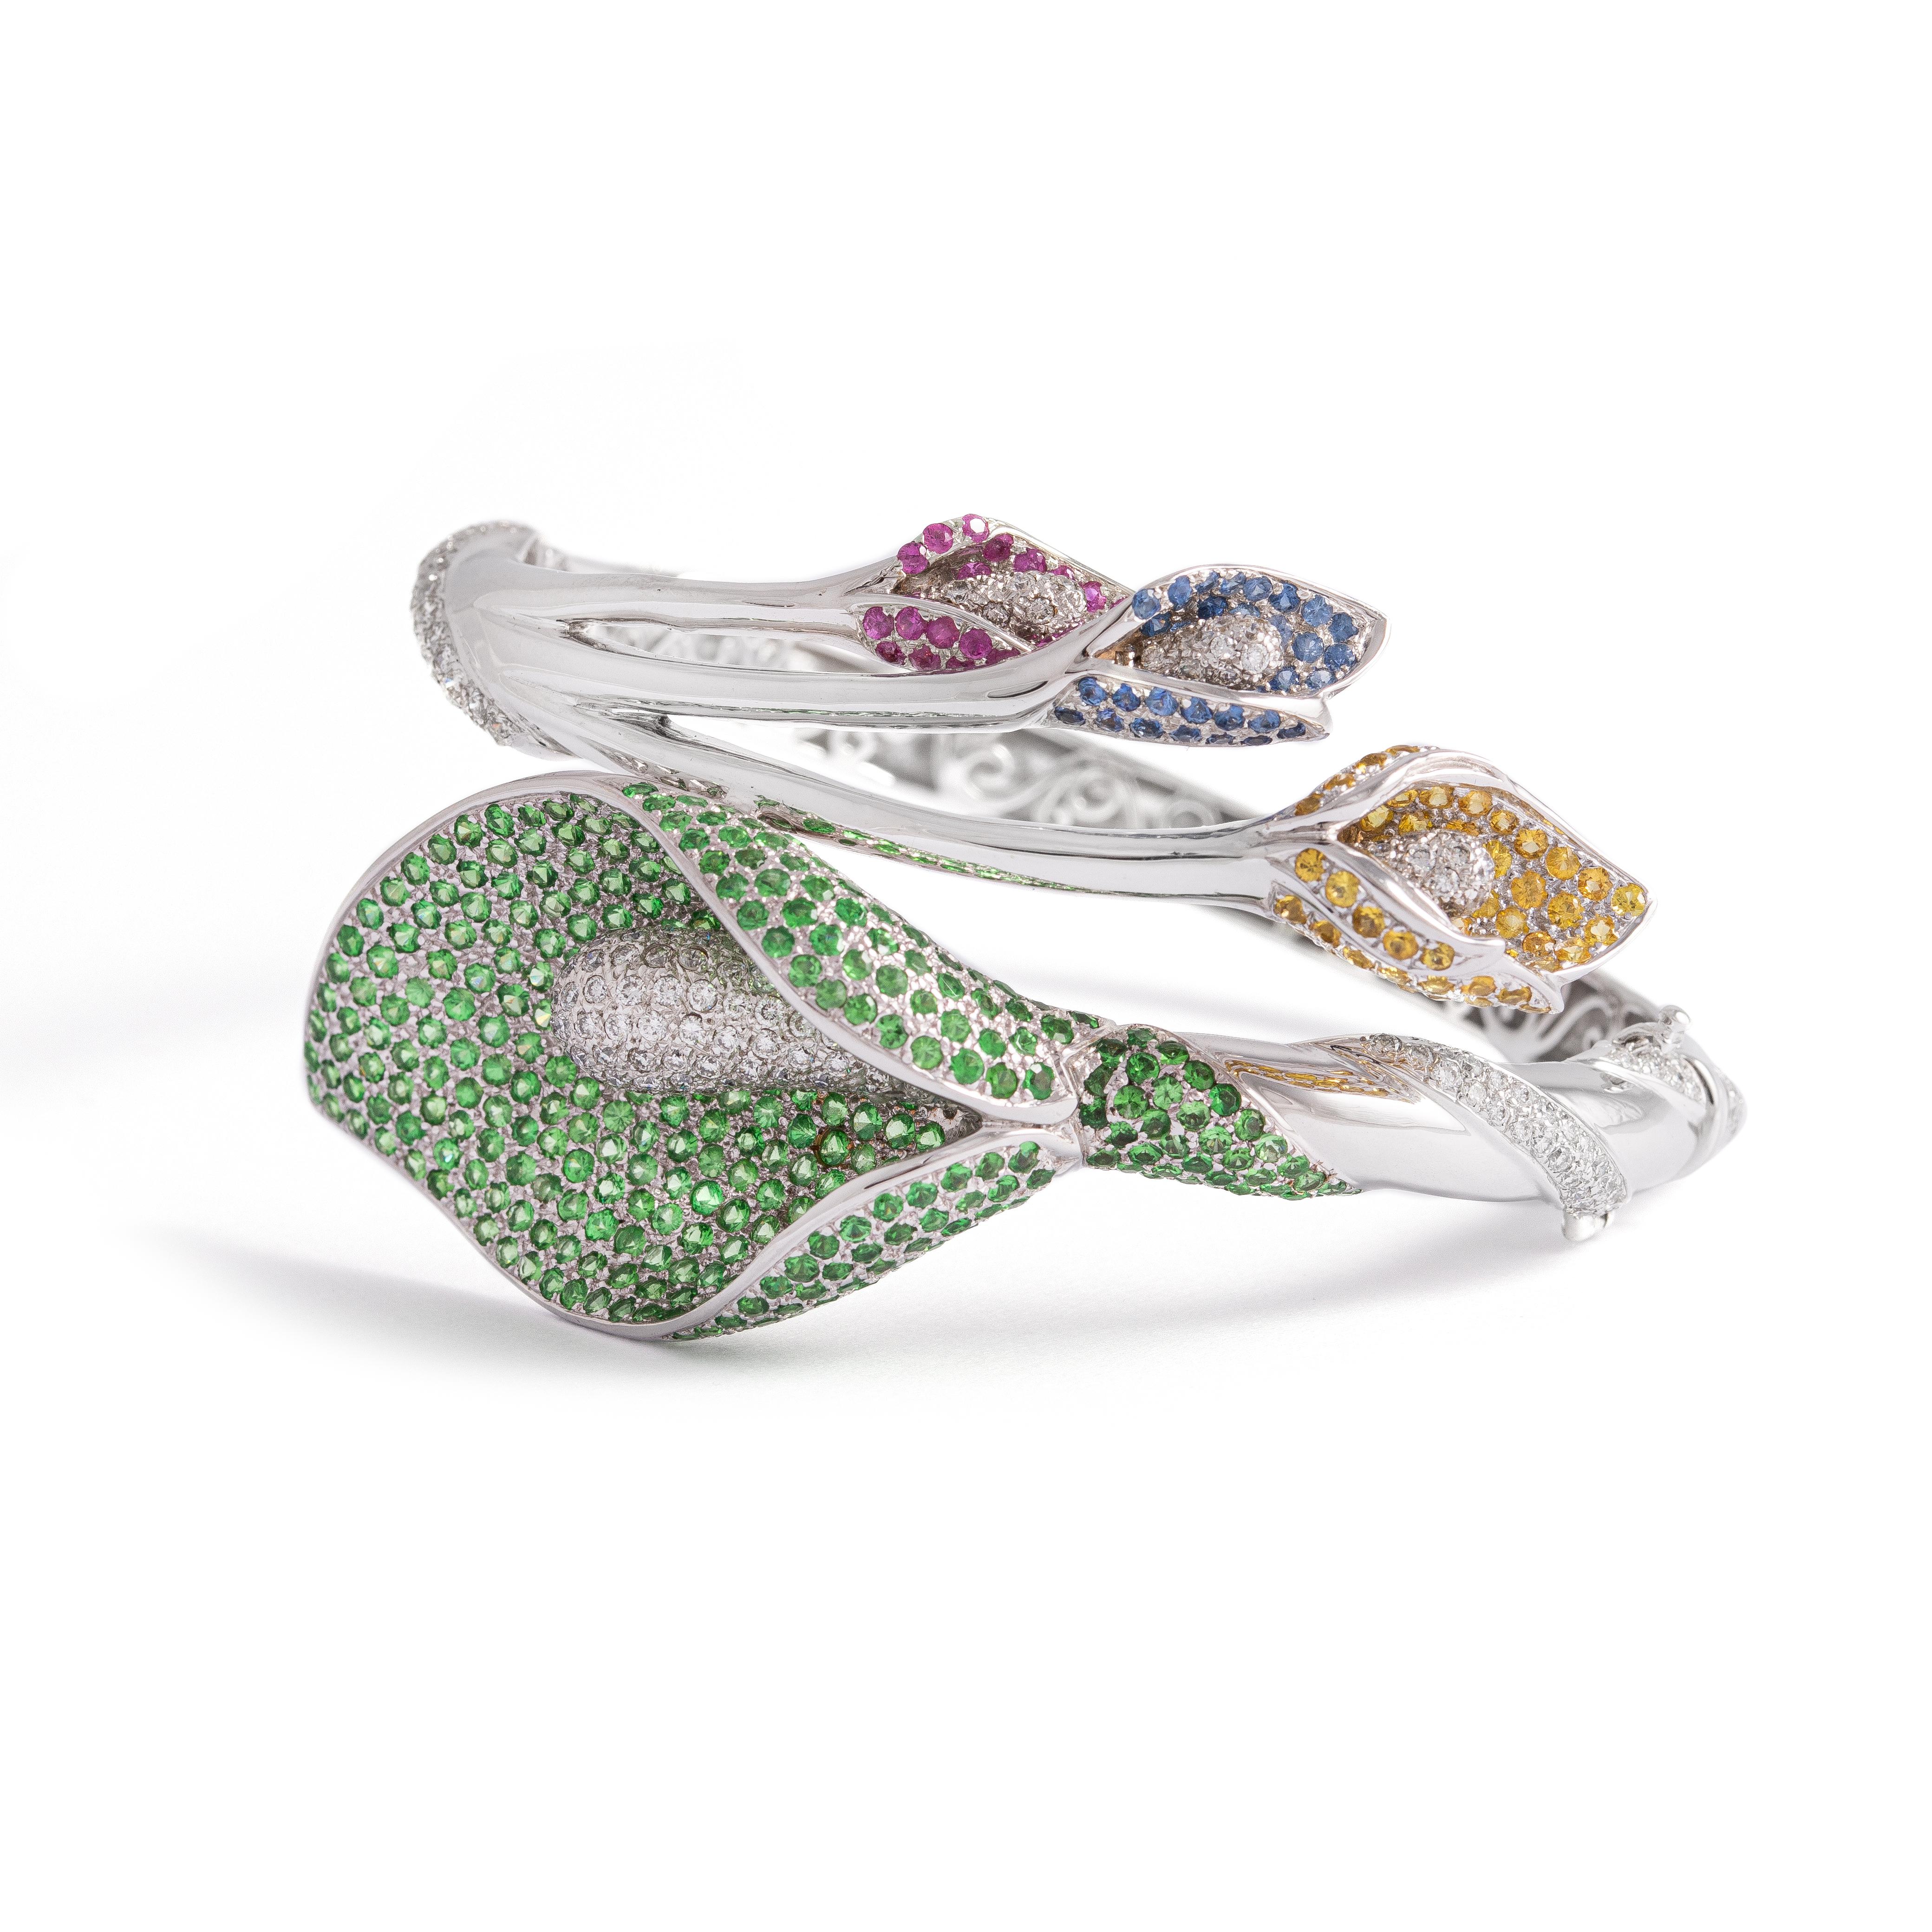 Bangle in 18kt white gold set with 301 diamonds 4.92 cts, 26 pink sapphires 0.53 cts, 343 green sapphires 7.12 cts and 36 sapphires 0.61 cts and 53 yellow sapphires 1.25 cts.

Inner circumference: Approximately 16.95 centimeters ( 6.67